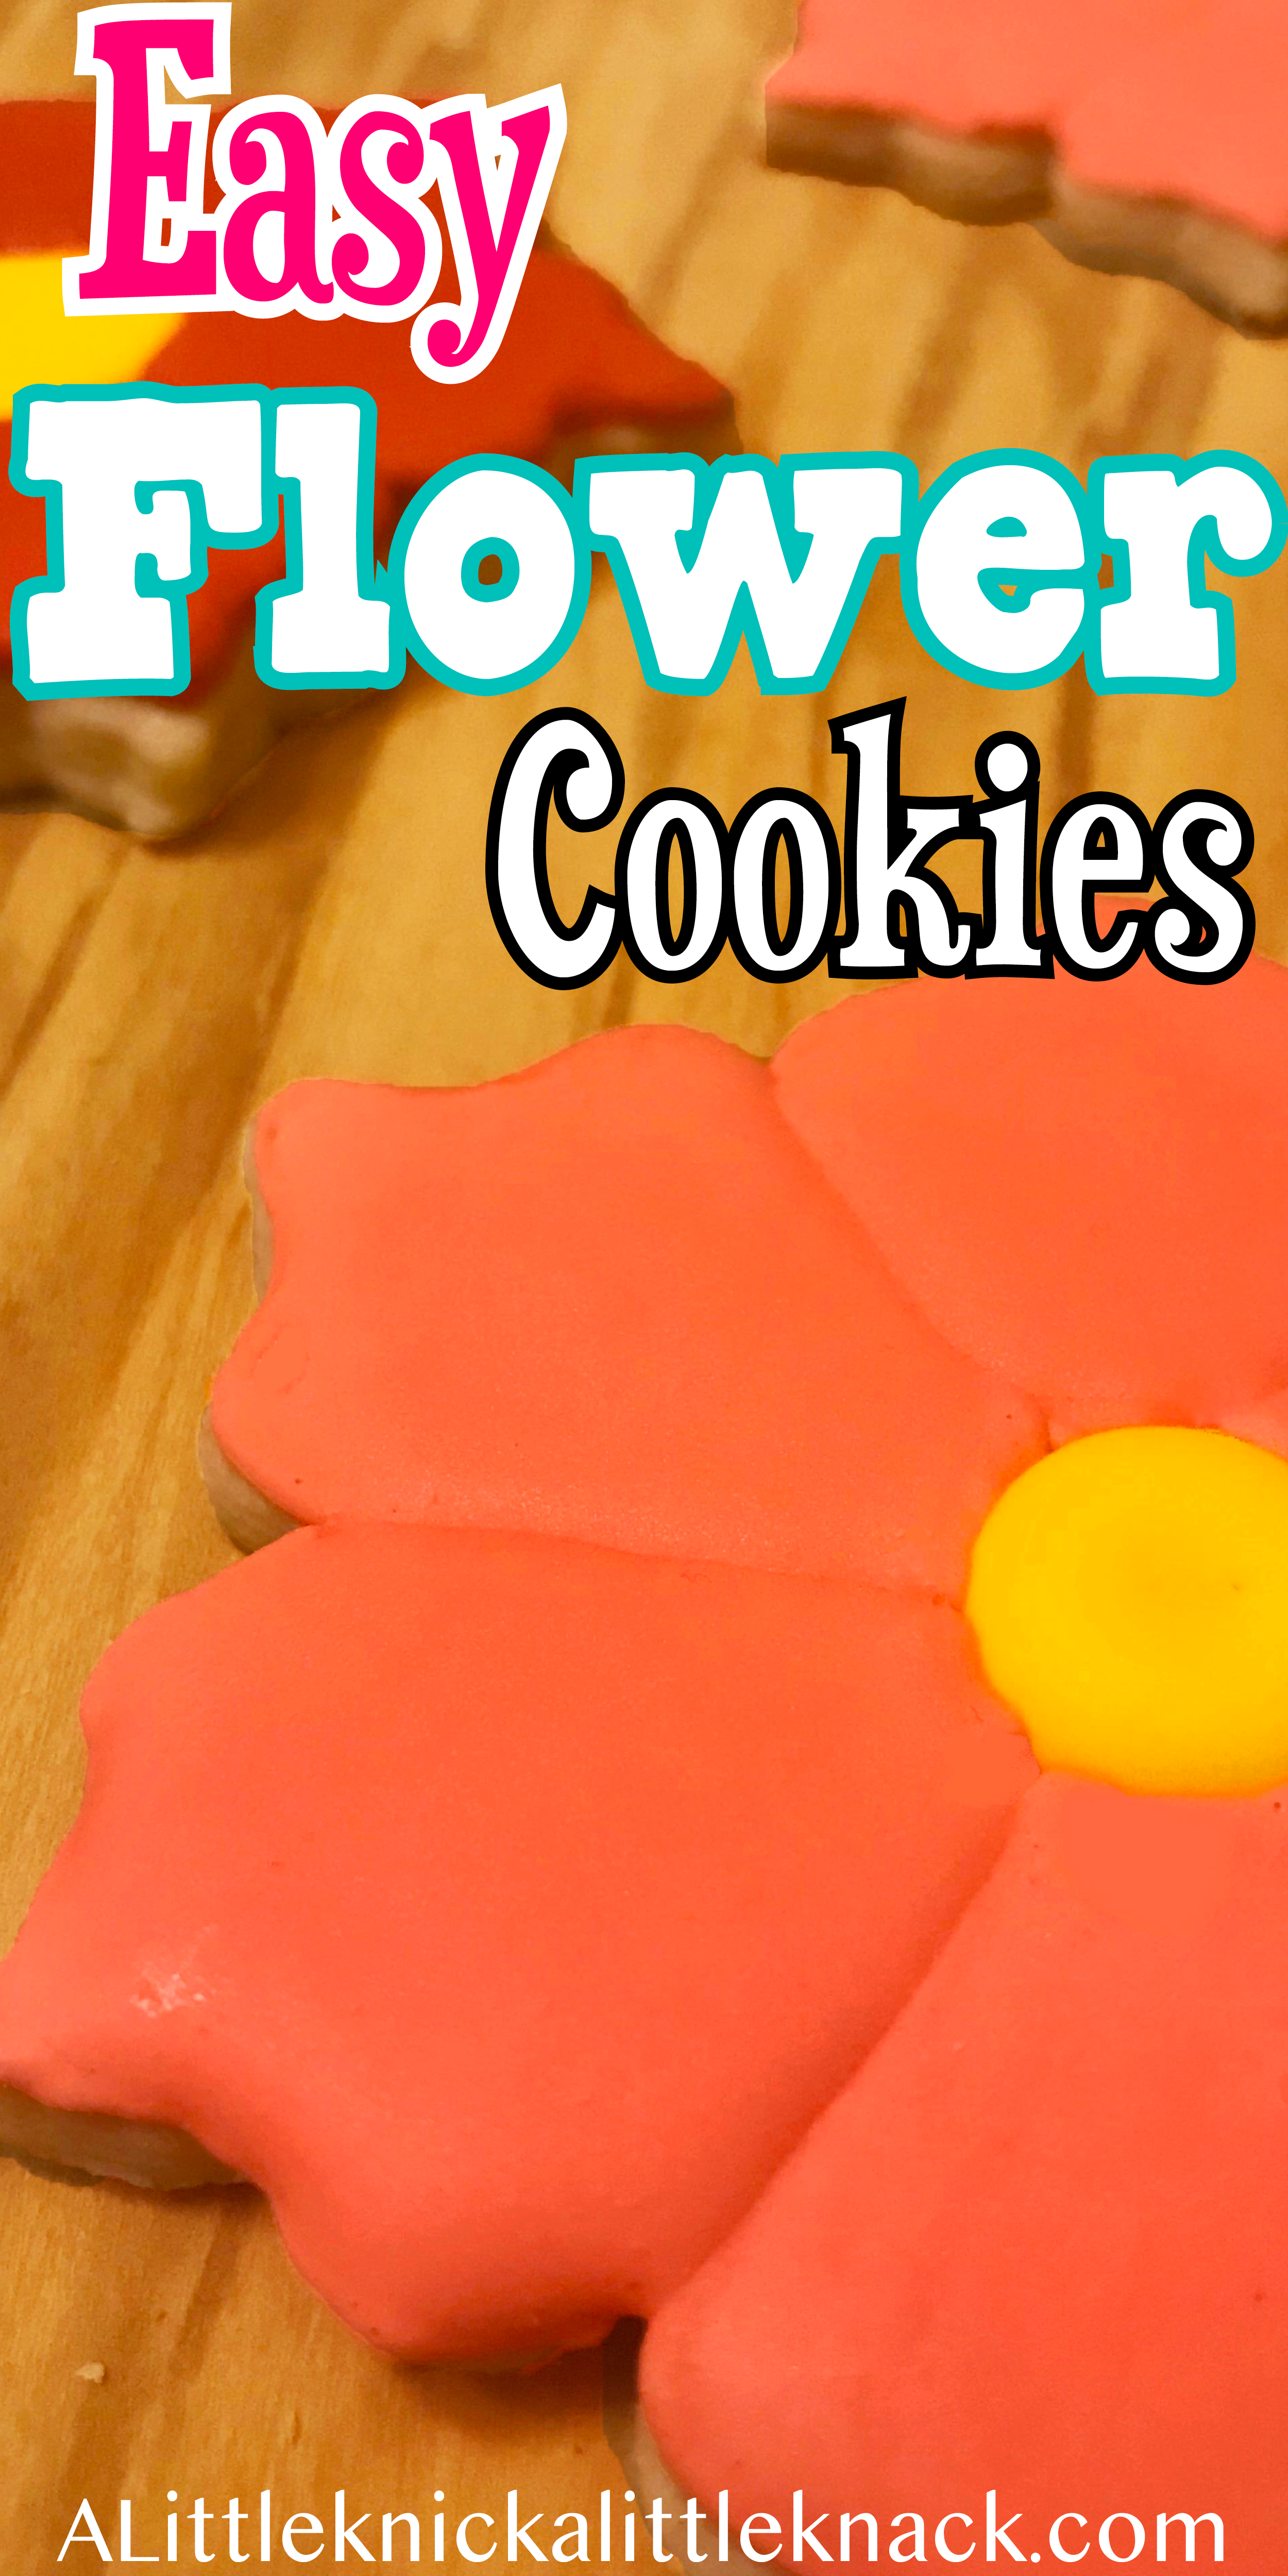 Pictures of flower cookies with text overlay 